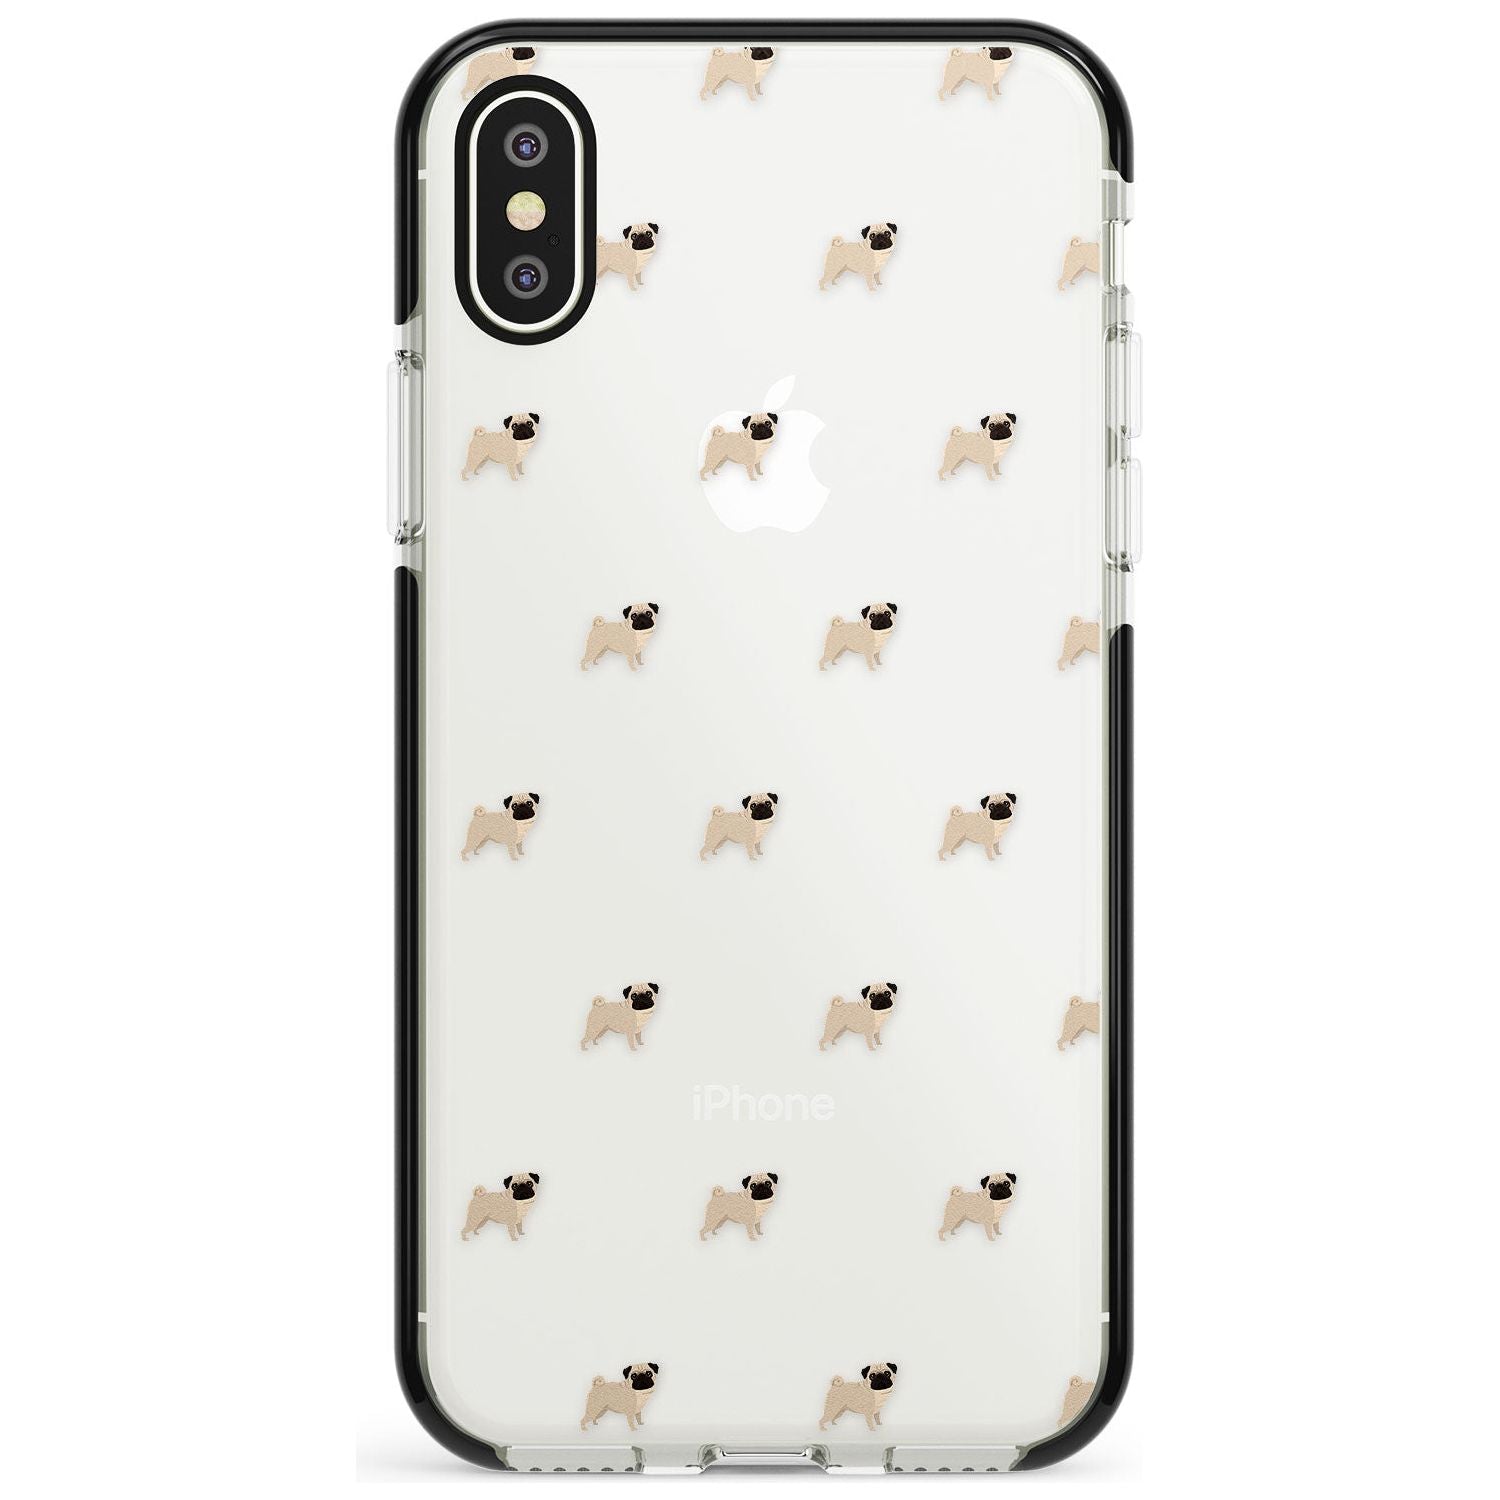 Pug Dog Pattern Clear Black Impact Phone Case for iPhone X XS Max XR